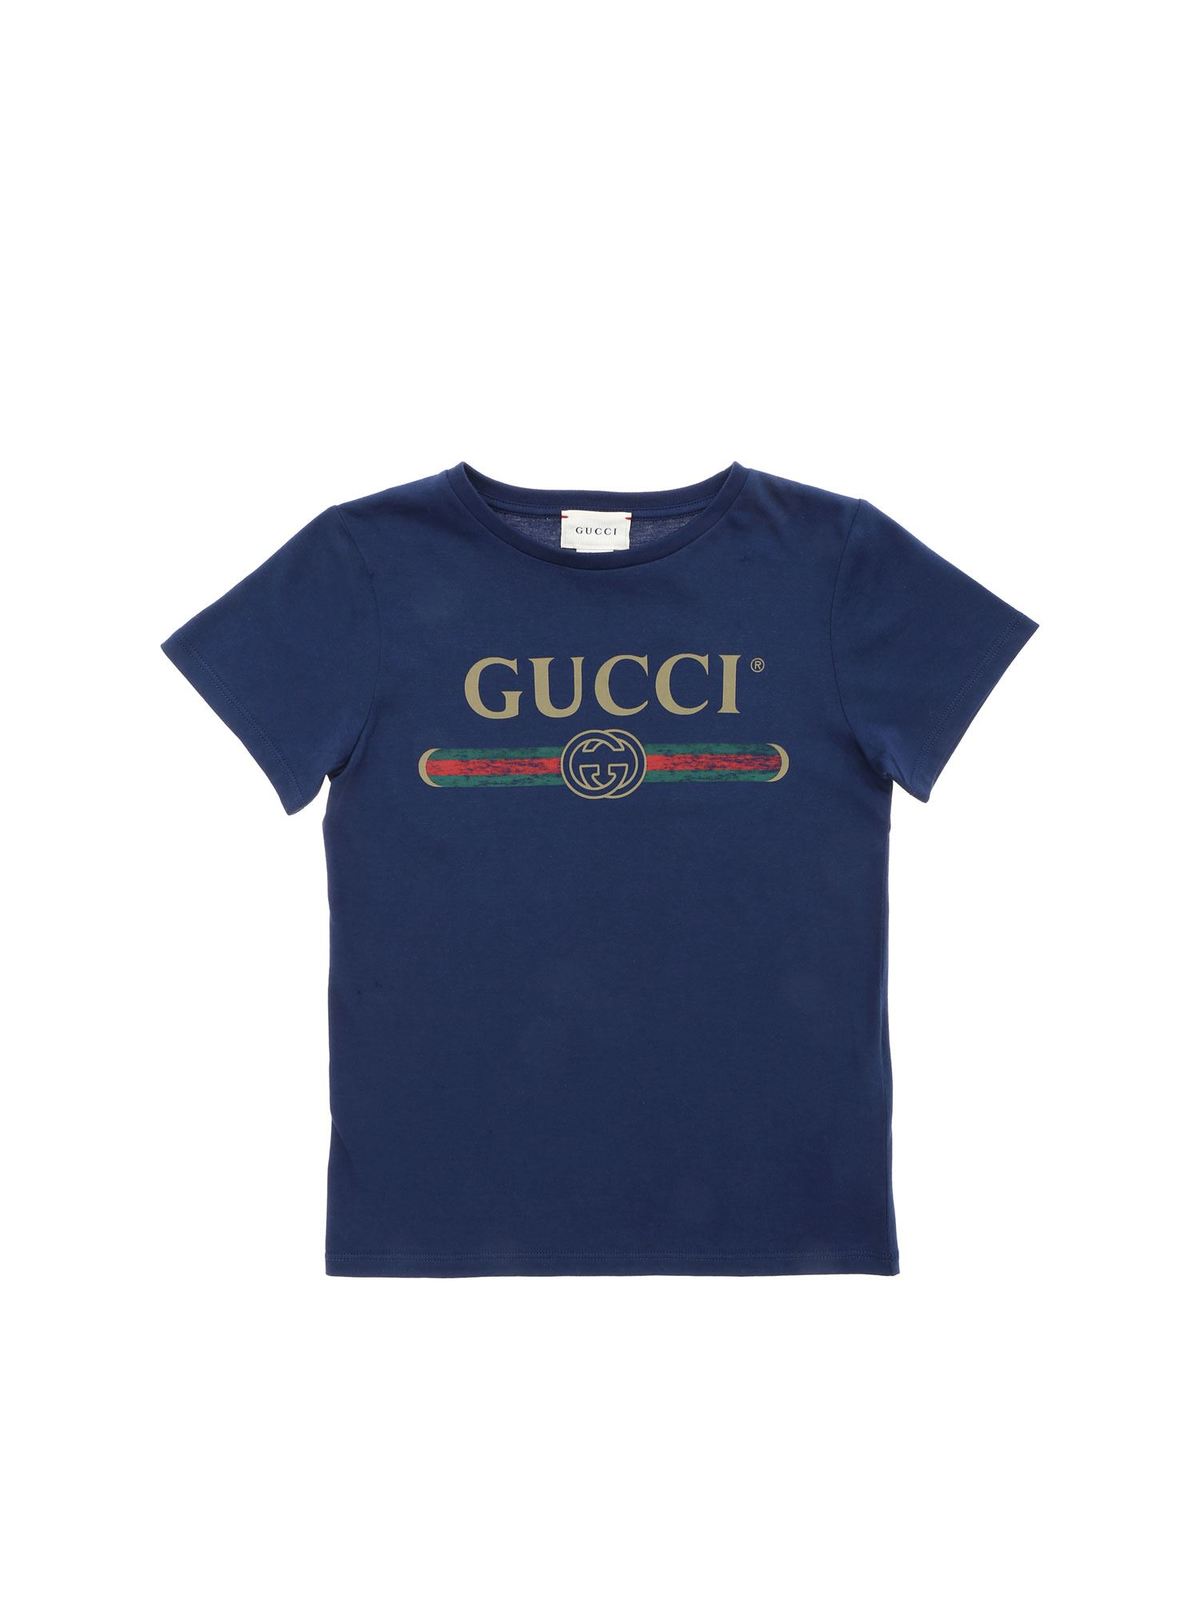 GUCCI BLUE T-SHIRT WITH CONTRASTING LOGO PRINT